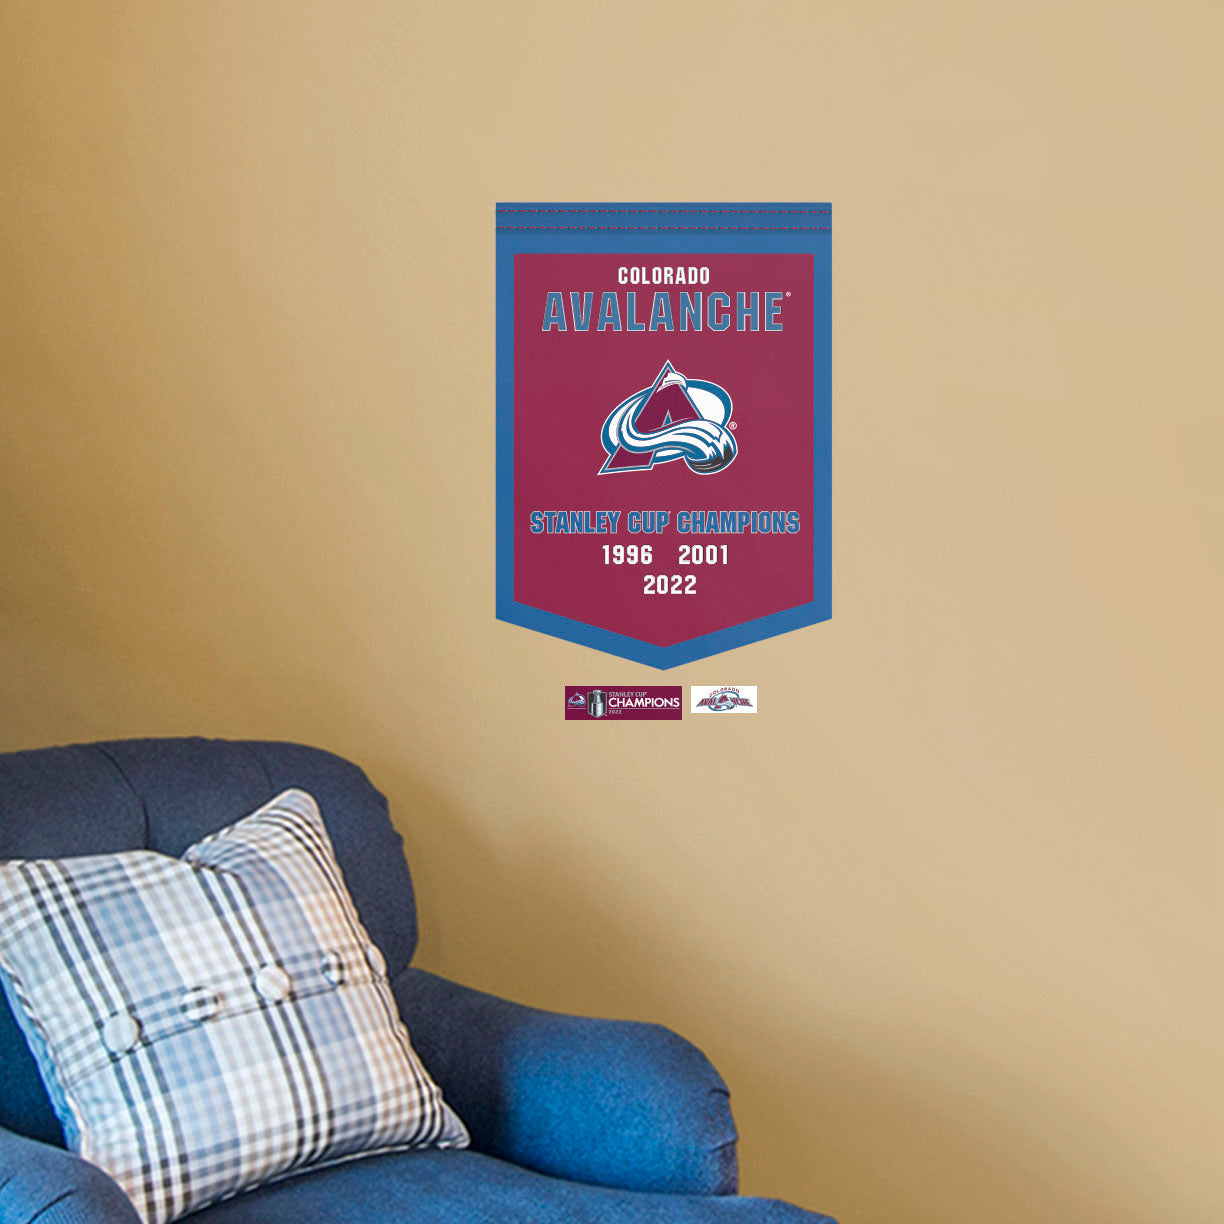 Colorado Avalanche: 2022 Stanley Cup Champions Banner - Officially Licensed NHL Removable Adhesive Decal